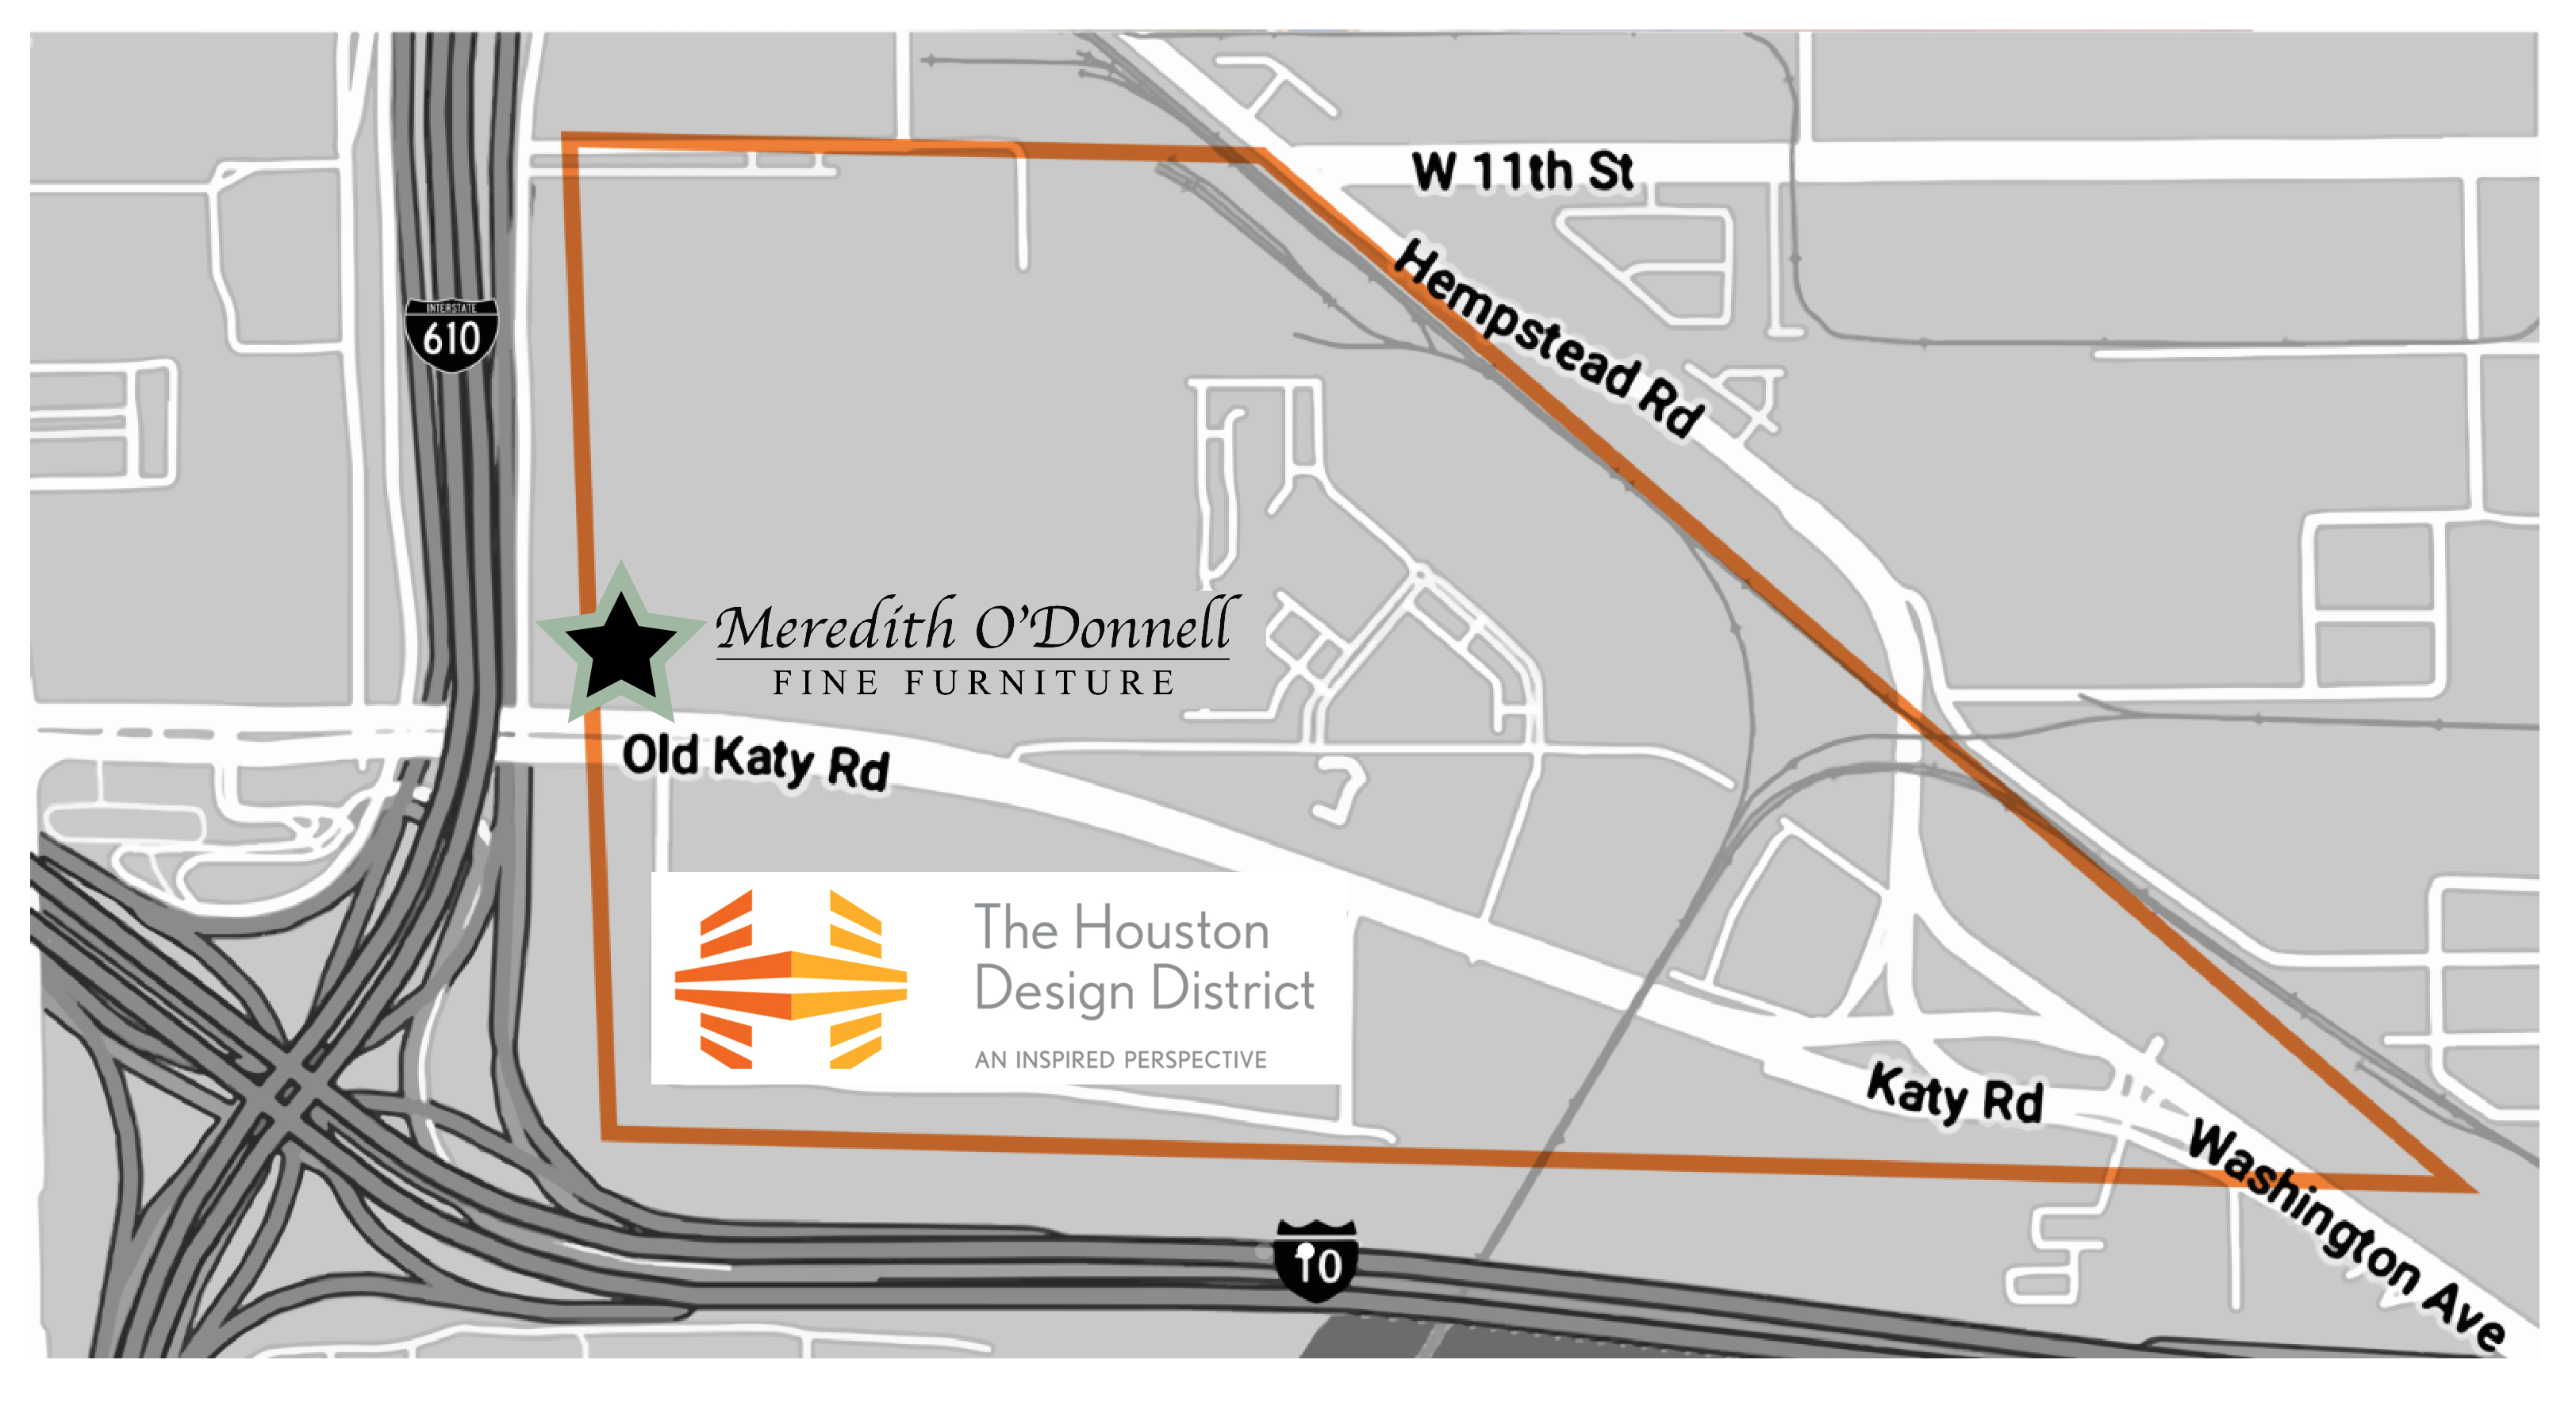 Houston Design District Map - Meredith ODonnell